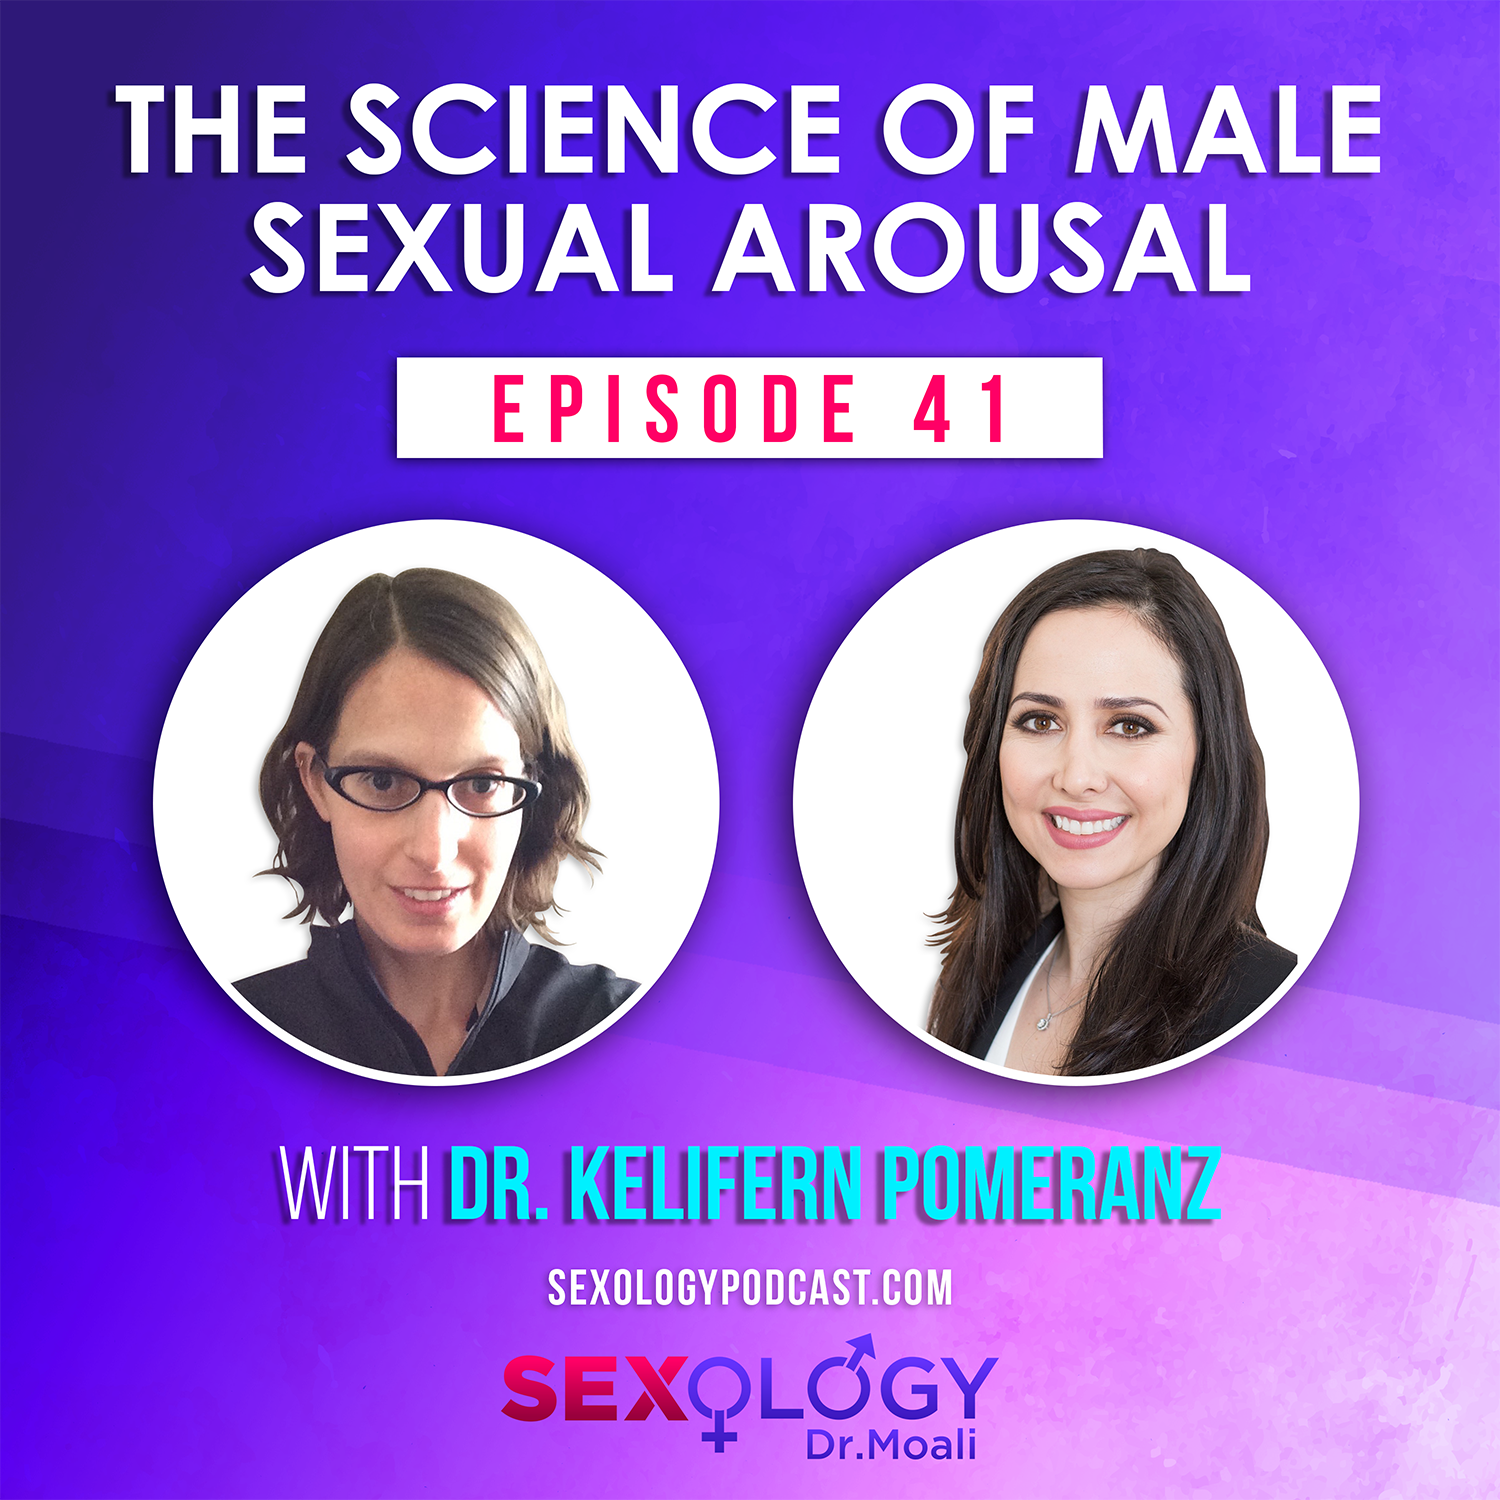 The Science of Male Sexual Arousal